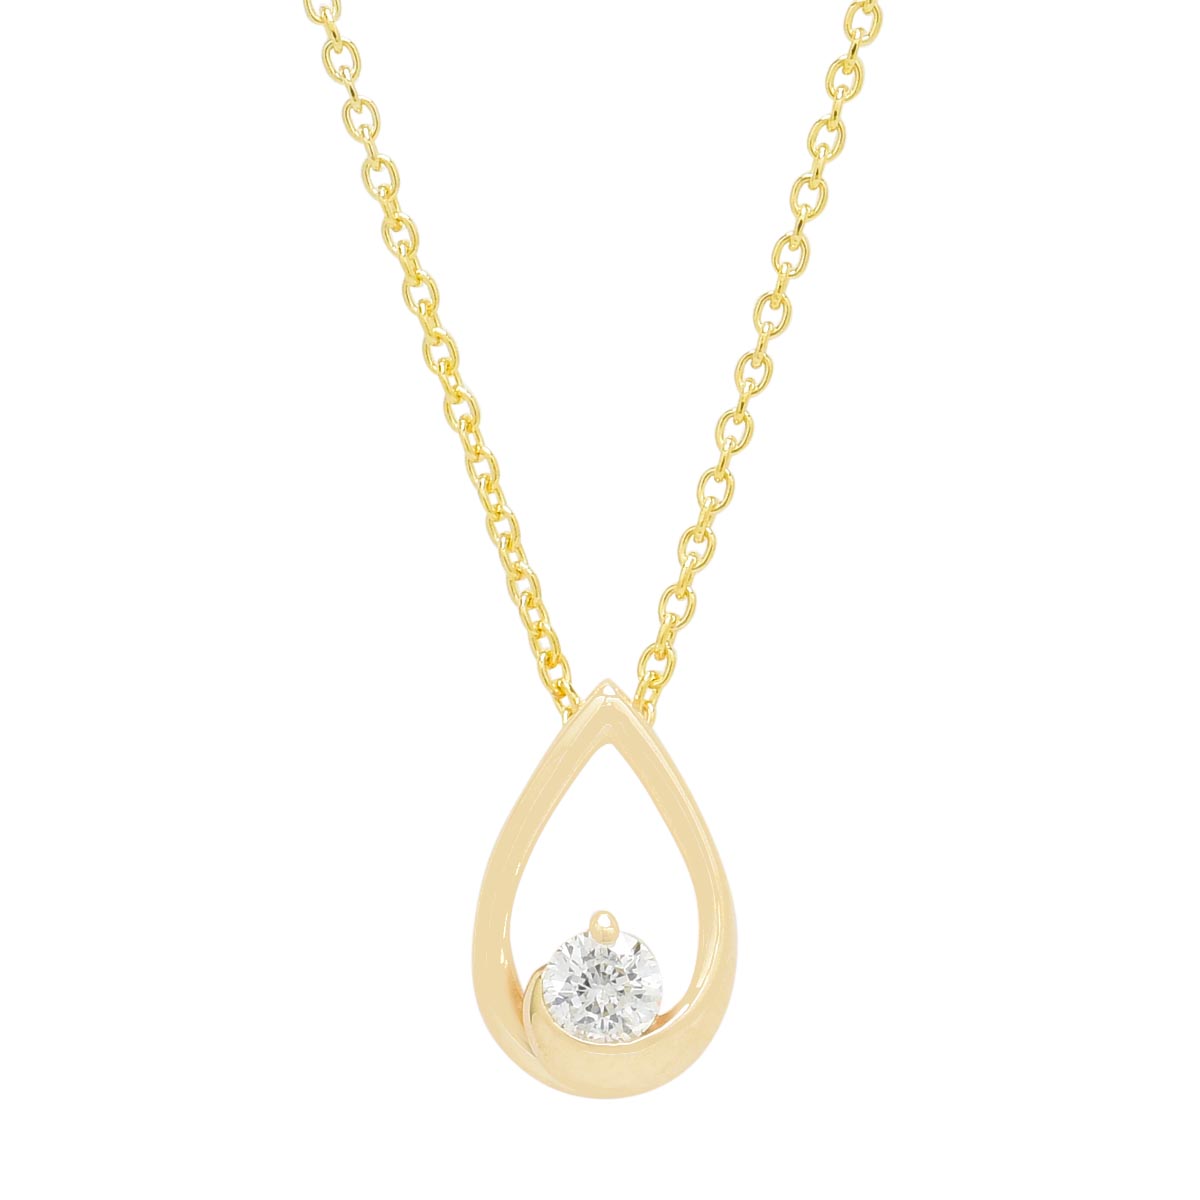 Northern Star Diamond Embrace Collection Necklace in 10kt Yellow Gold (1/10ct)